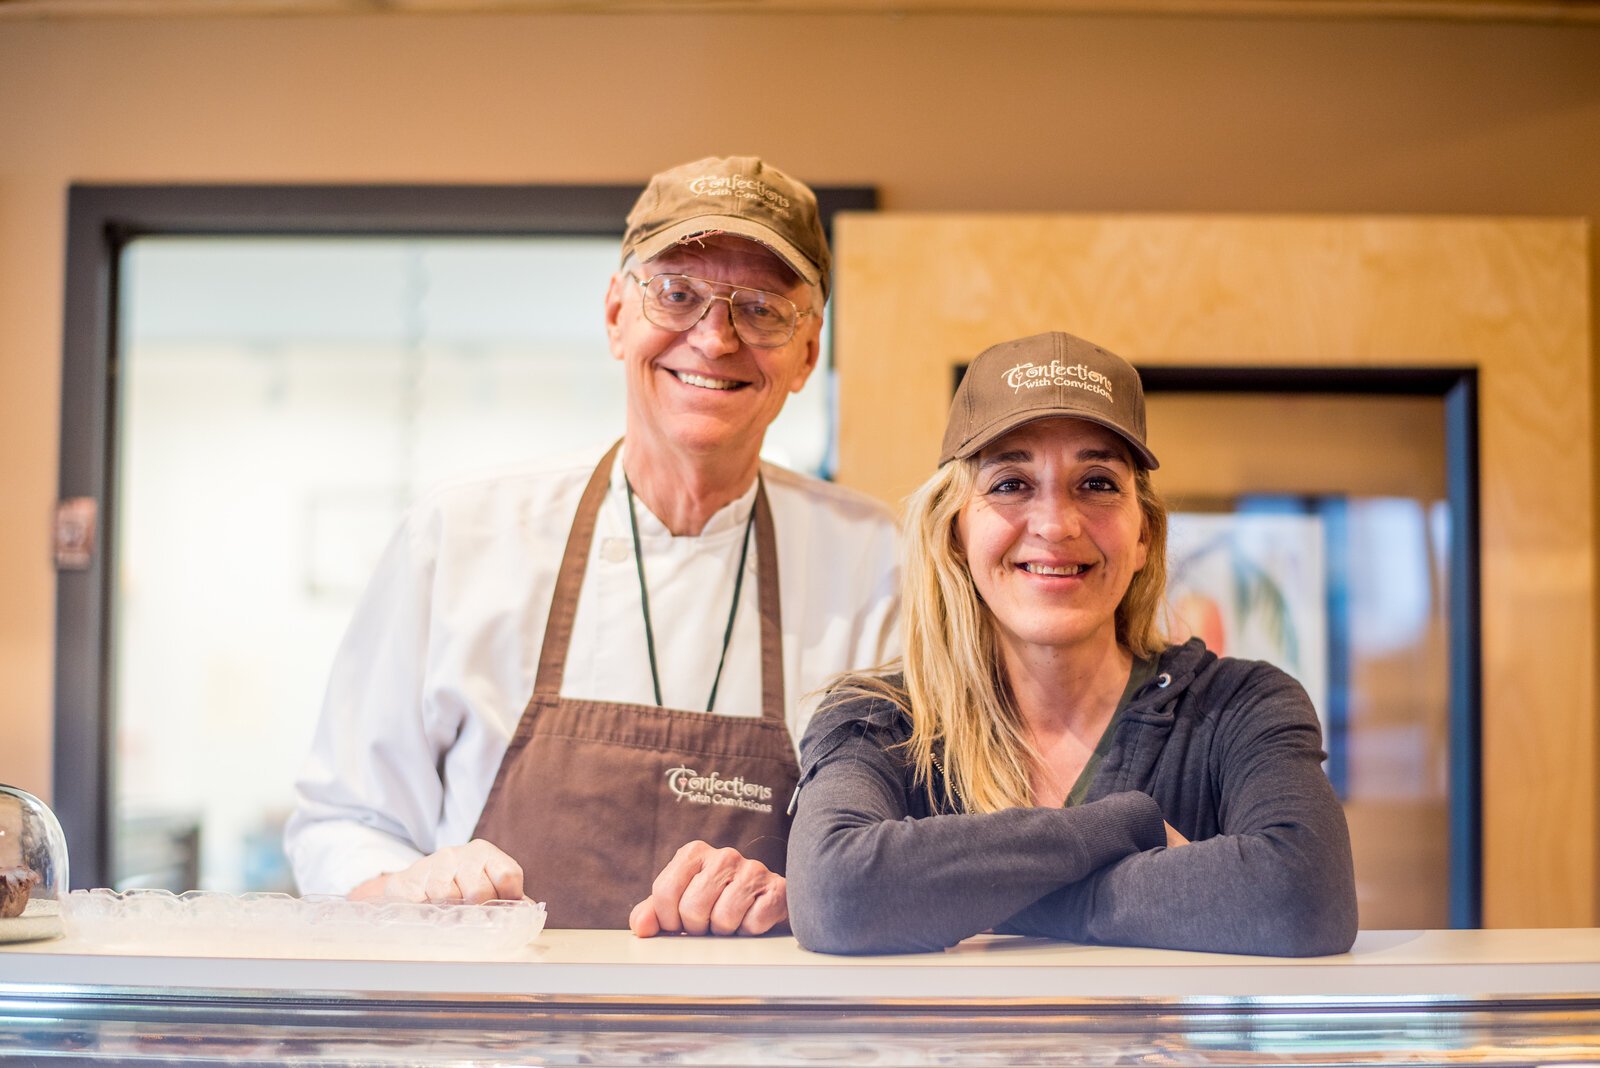 Founder, mentor, and former owner of Confections with Convictions Dale Anderson with new owner Jennifer Faketty